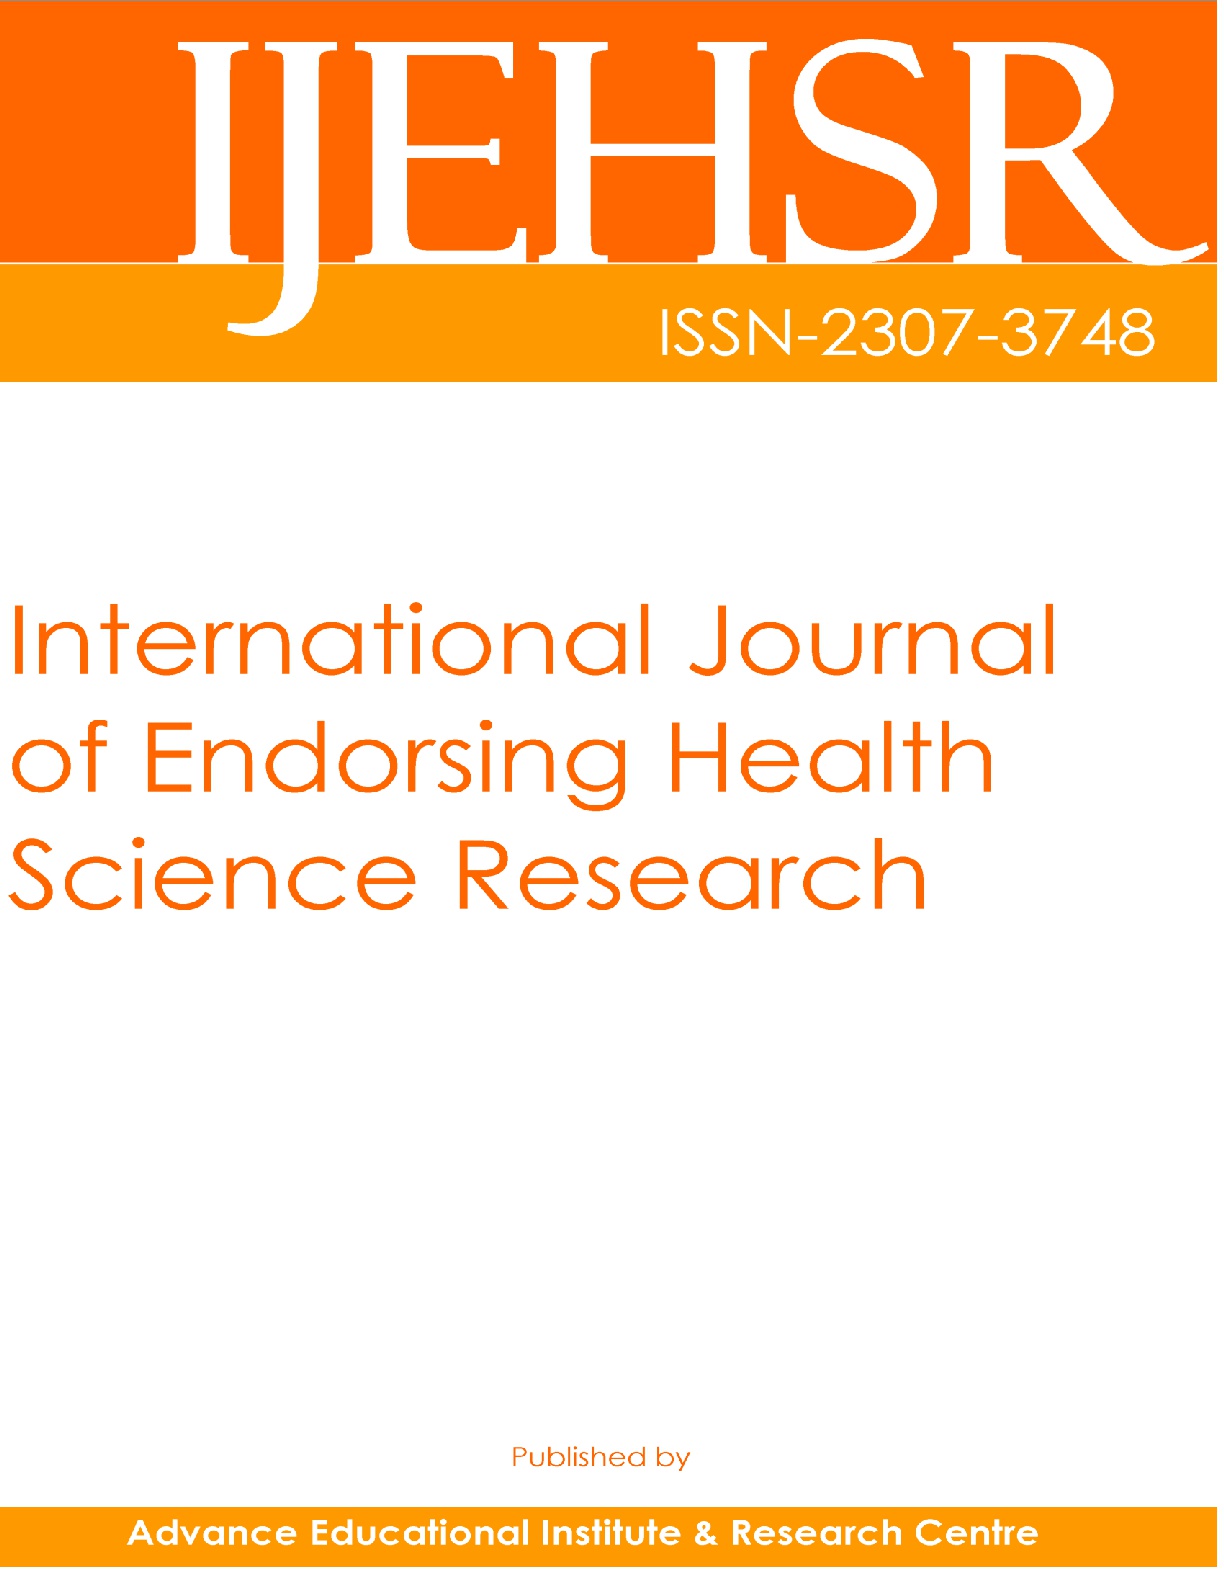 					View Vol. 1 No. 2 (2013): International Journal of Endorsing Health Science Research
				